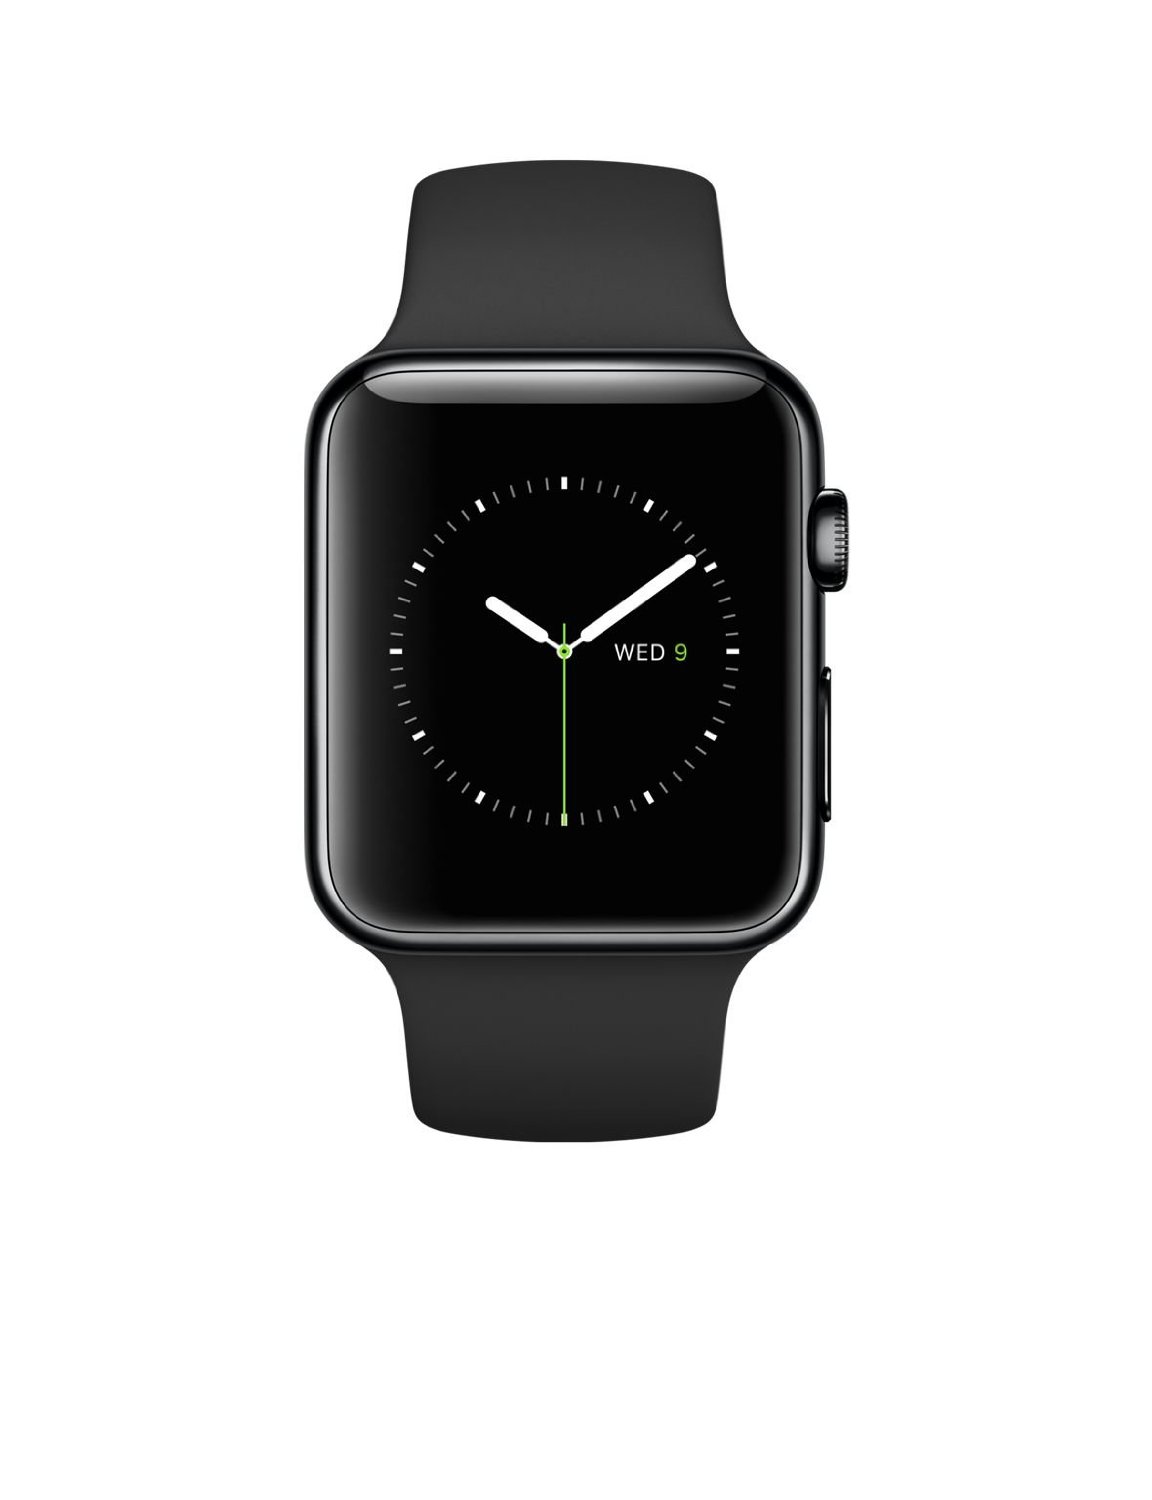 Save Big on the Apple Watch – Just $269.99!